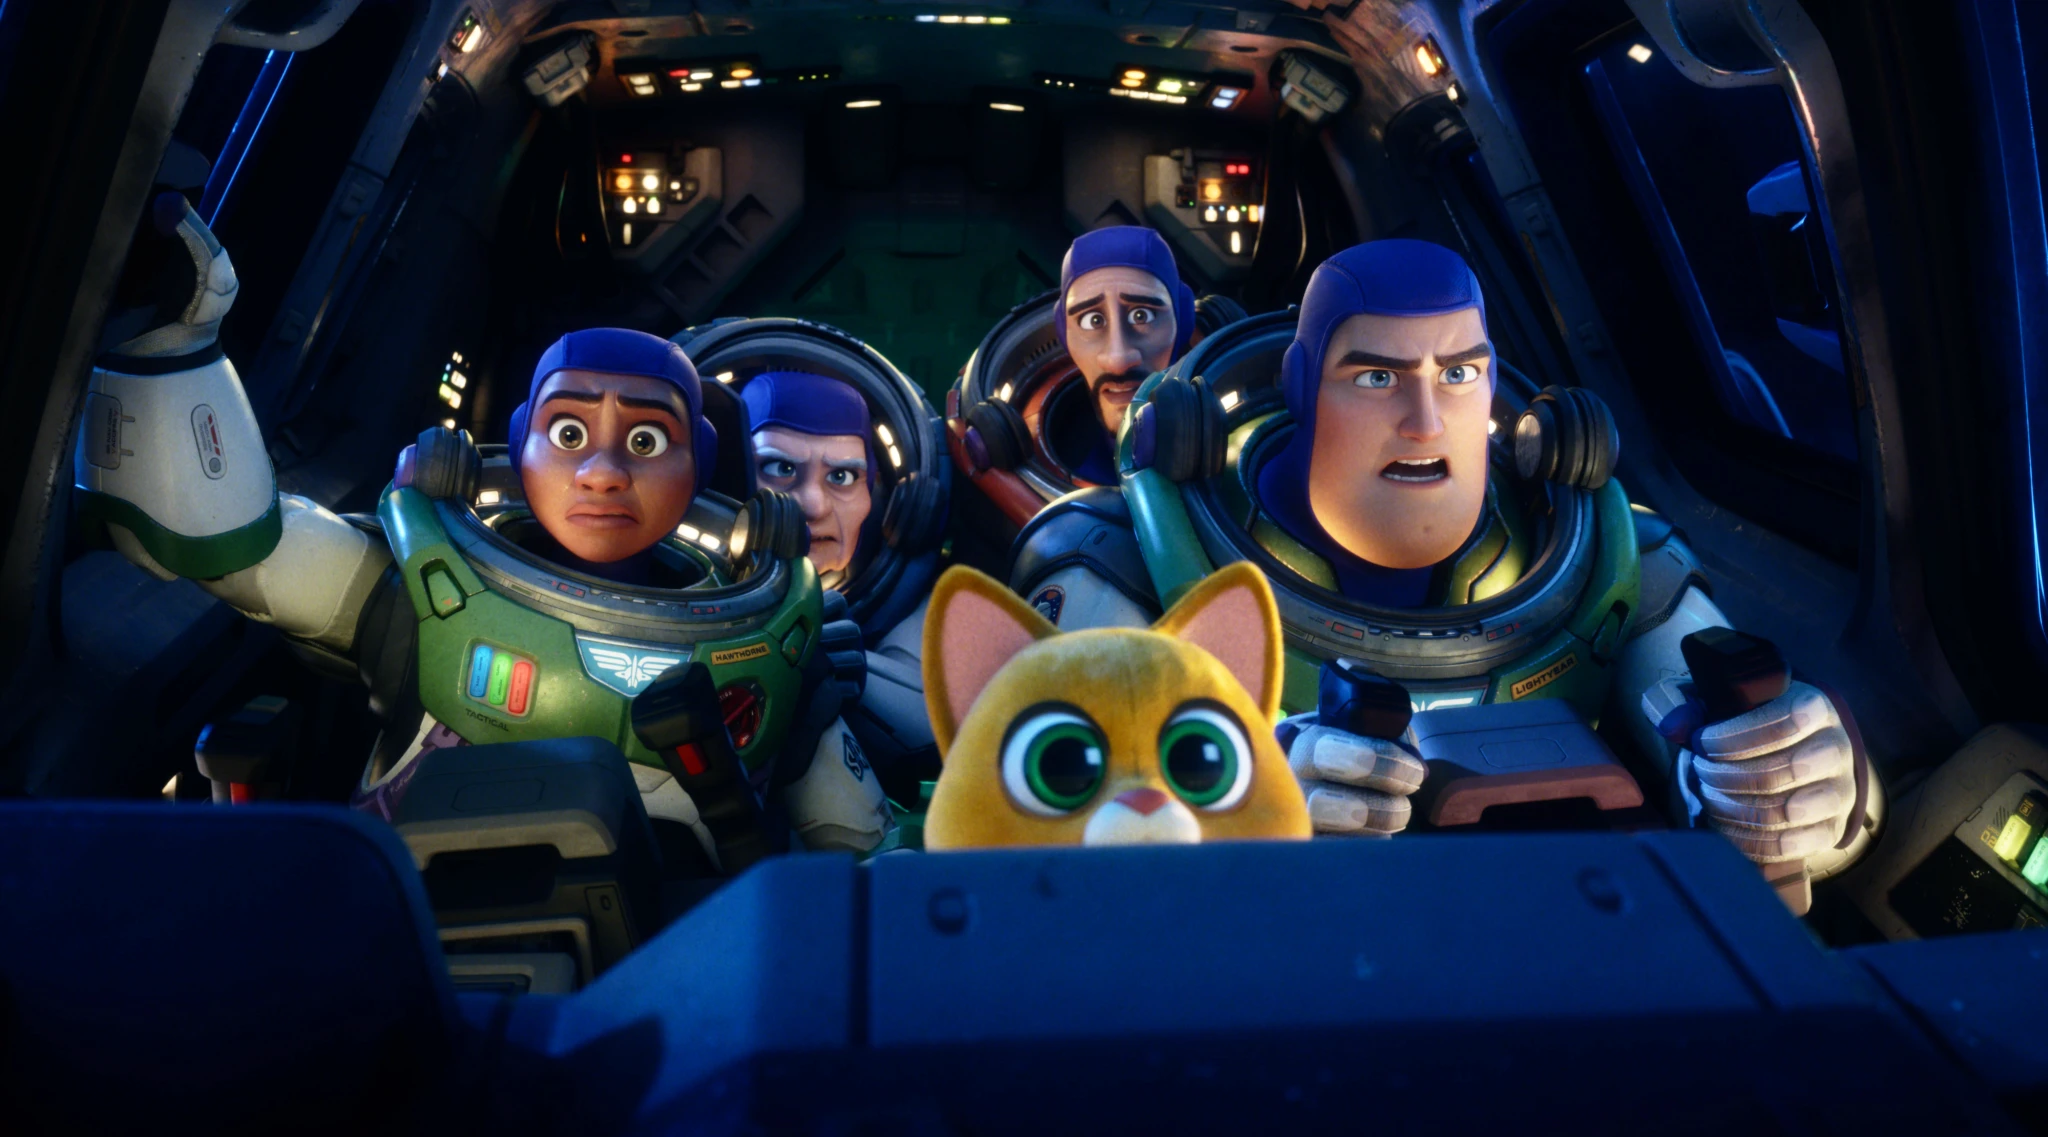 'Lightyear' Filmmakers on Raising the Bar for Pixar Animation and What Comes Next (Exclusive)